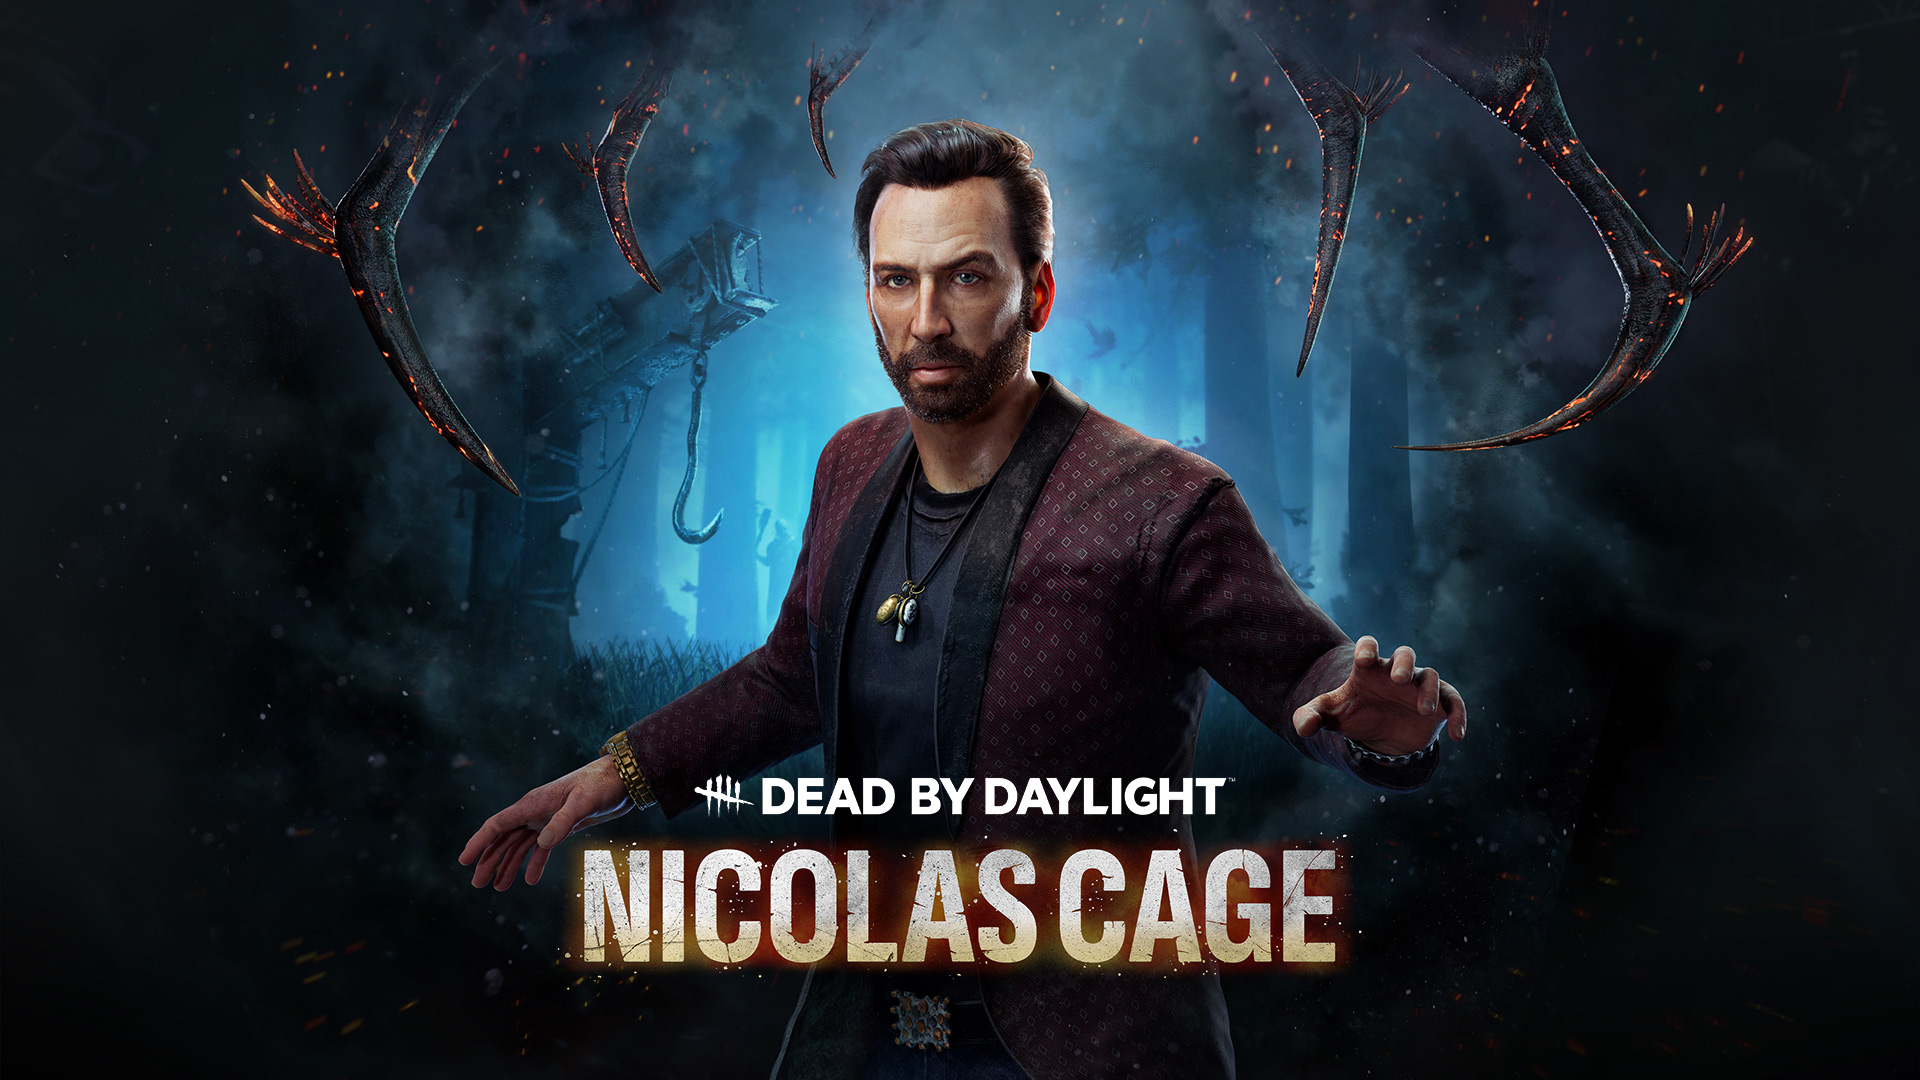 Nicolas Cage is now playable in Dead by Daylight